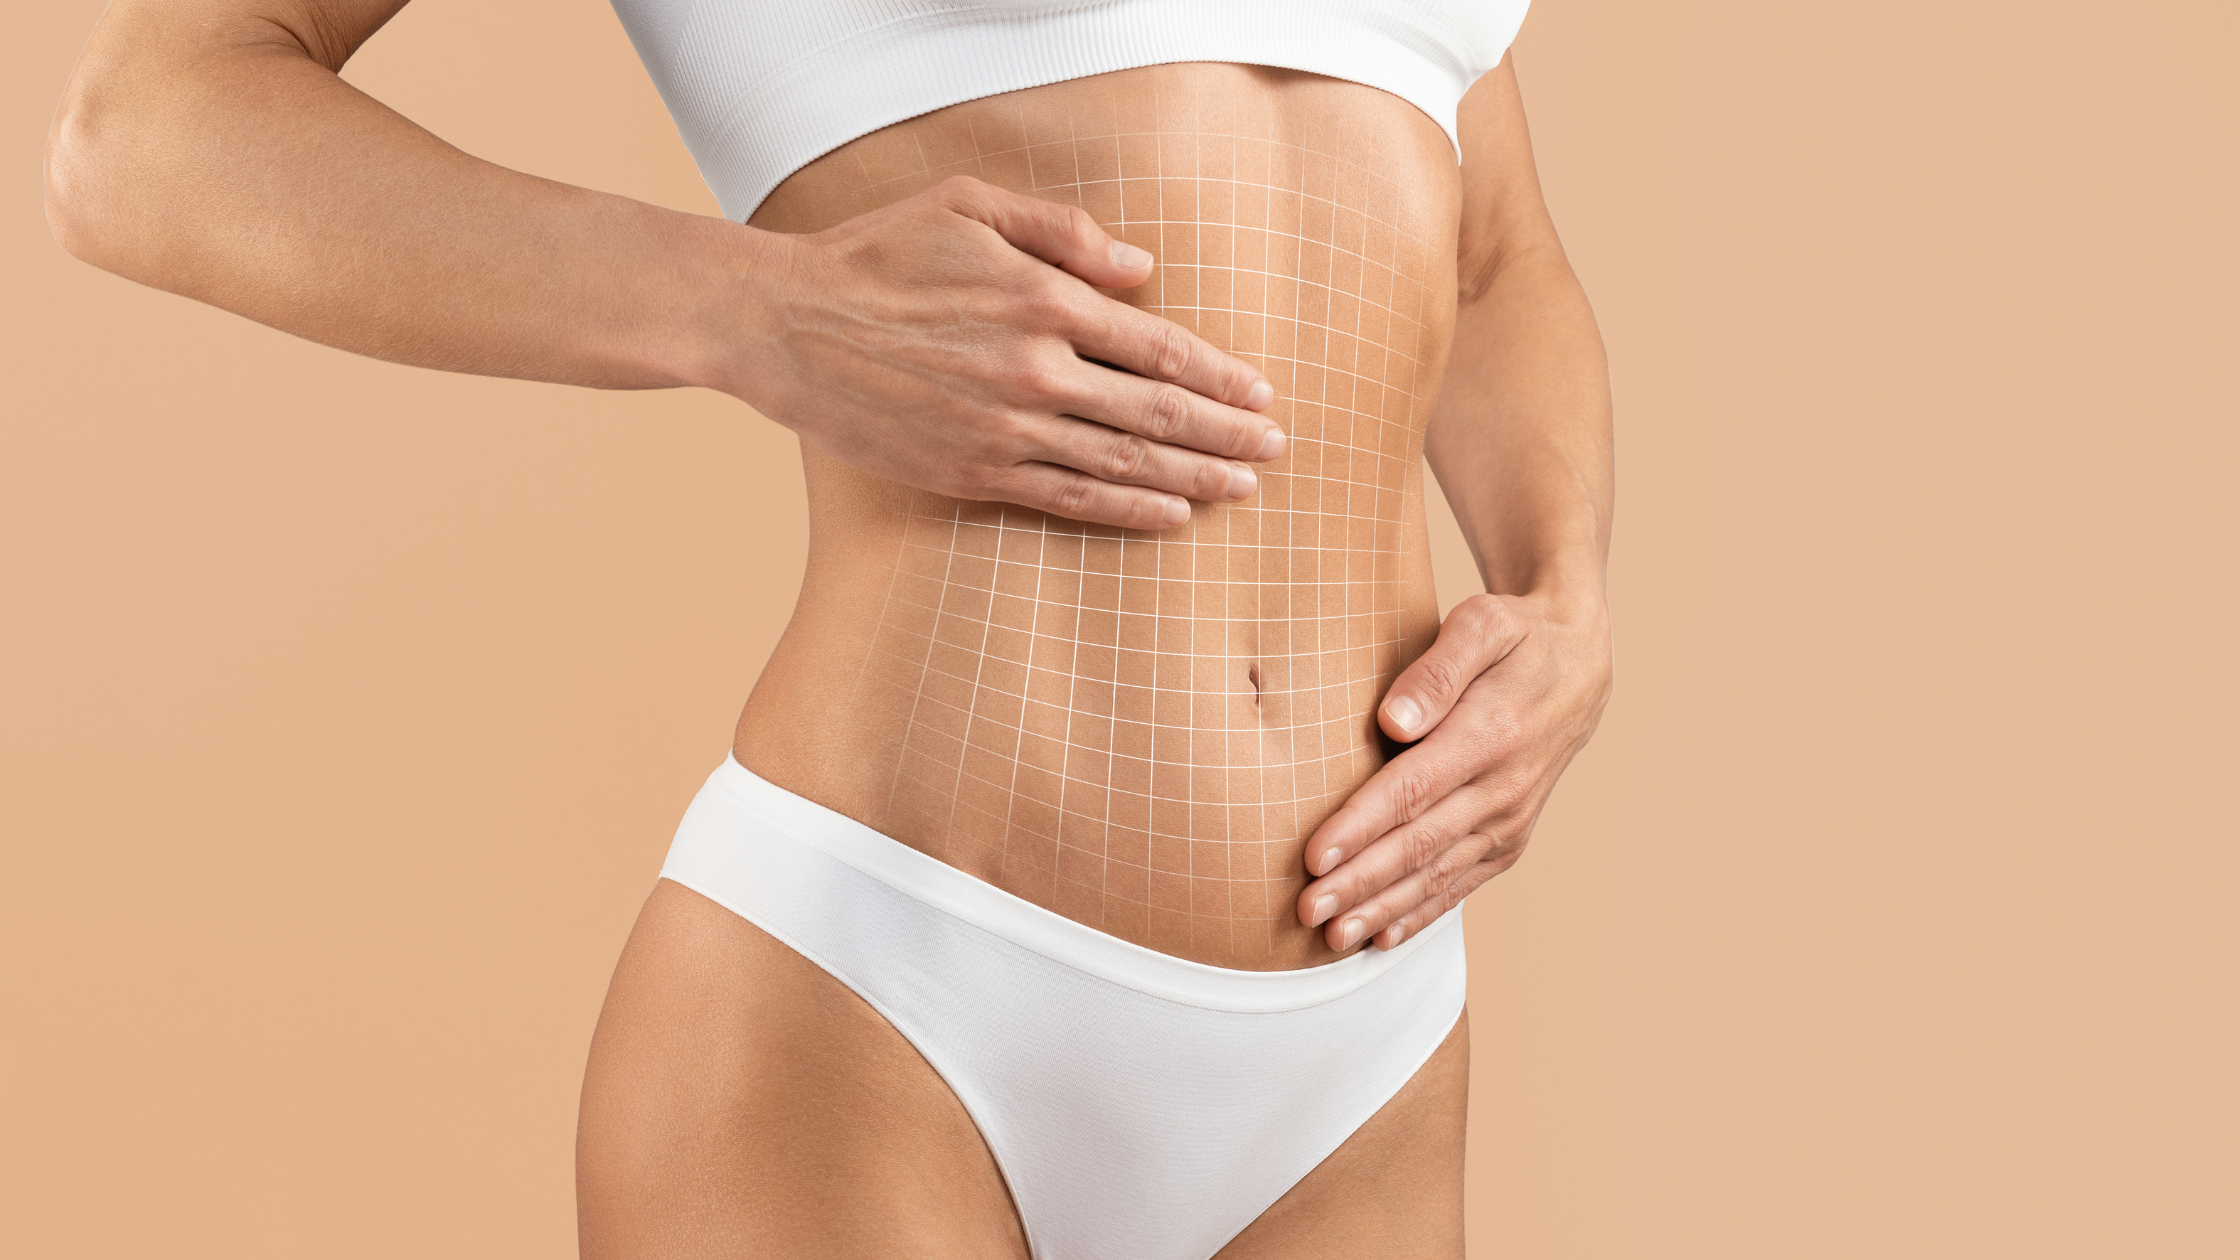 Flat Belly Solutions: Comparing Tummy Tucks and Liposuction